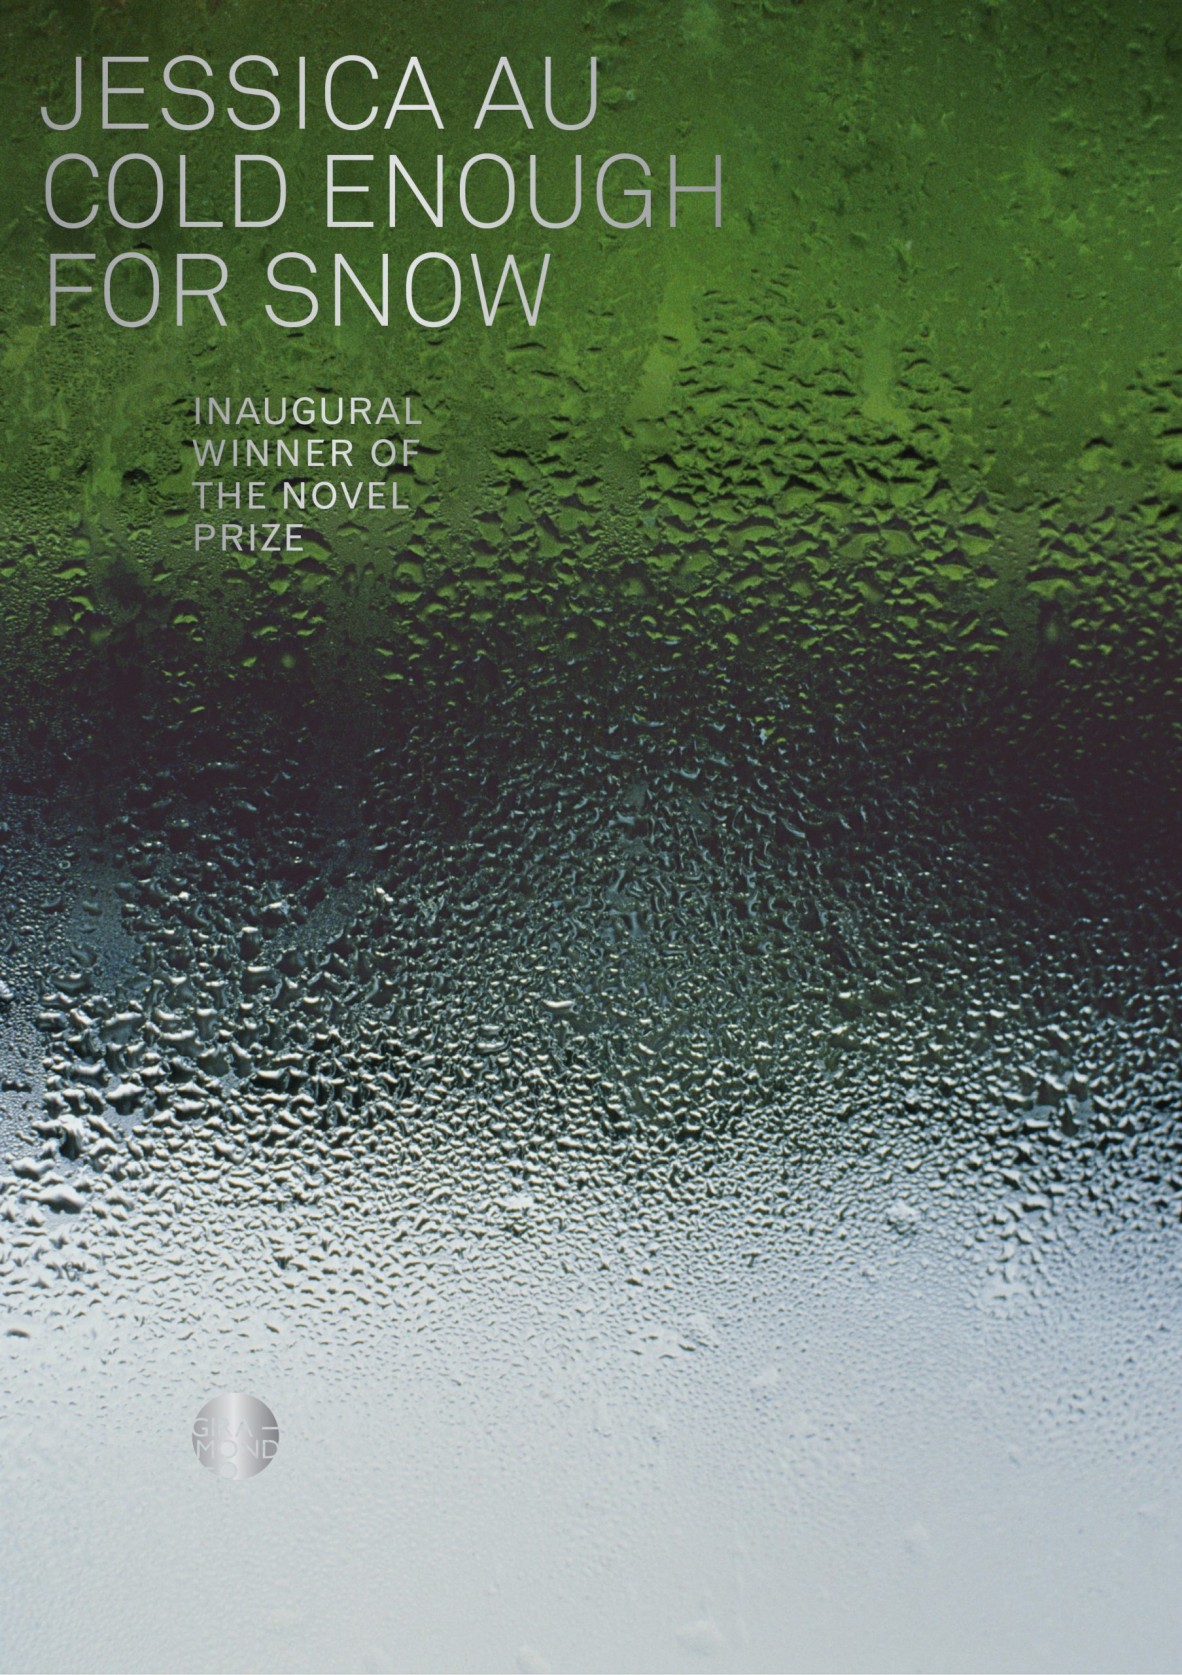 Cover of Cold Enough for Snow by Jessica Au Its a window with water droplets on it the cover shows a blurred green and black image behind the glass